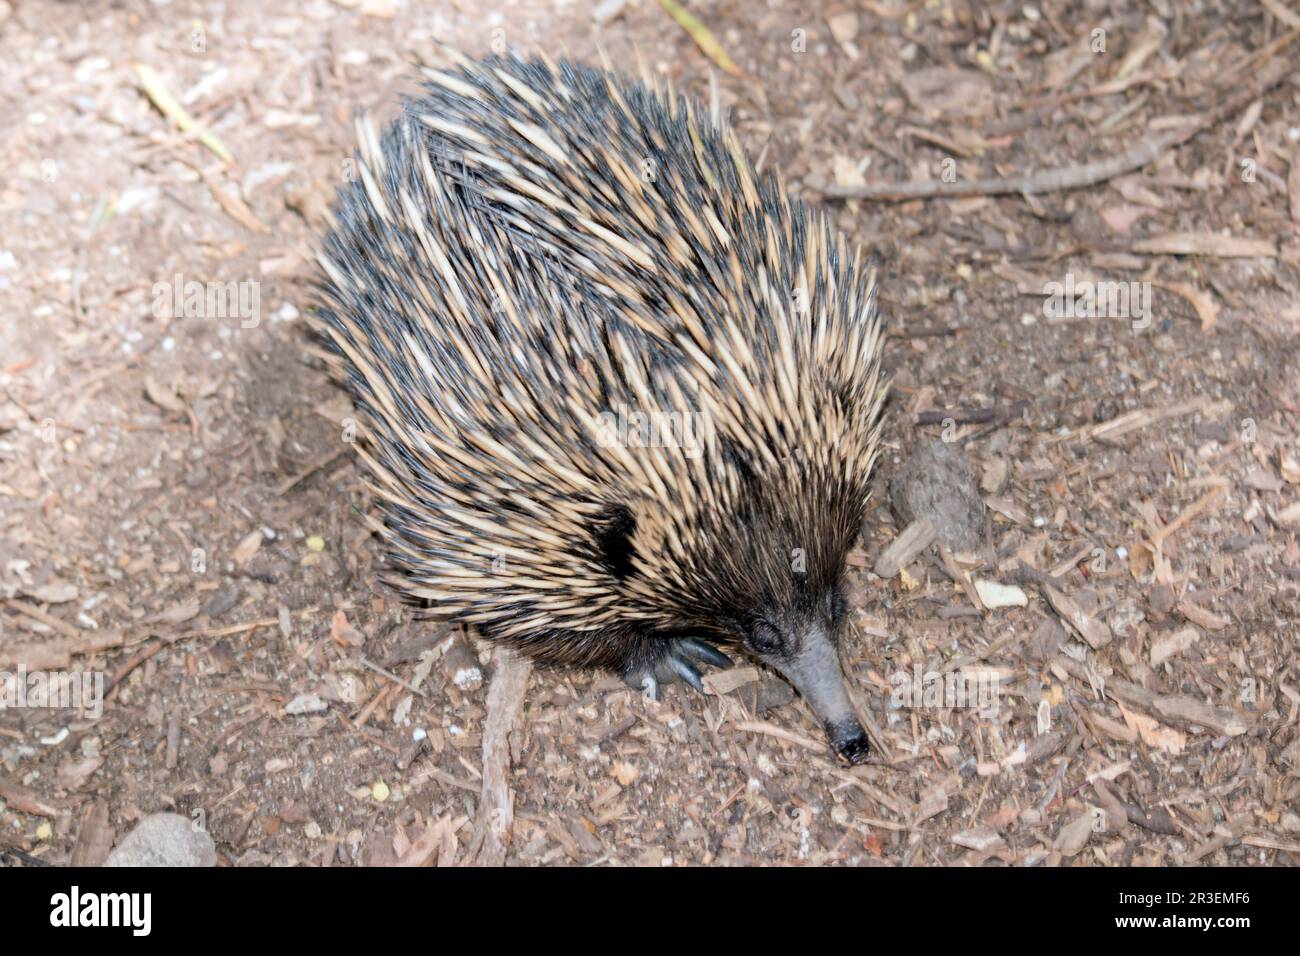 The echidna has spines like a porcupine, a beak like a bird, a pouch like a kangaroo, and lays eggs like a reptile. Also known as spiny anteaters, the Stock Photo